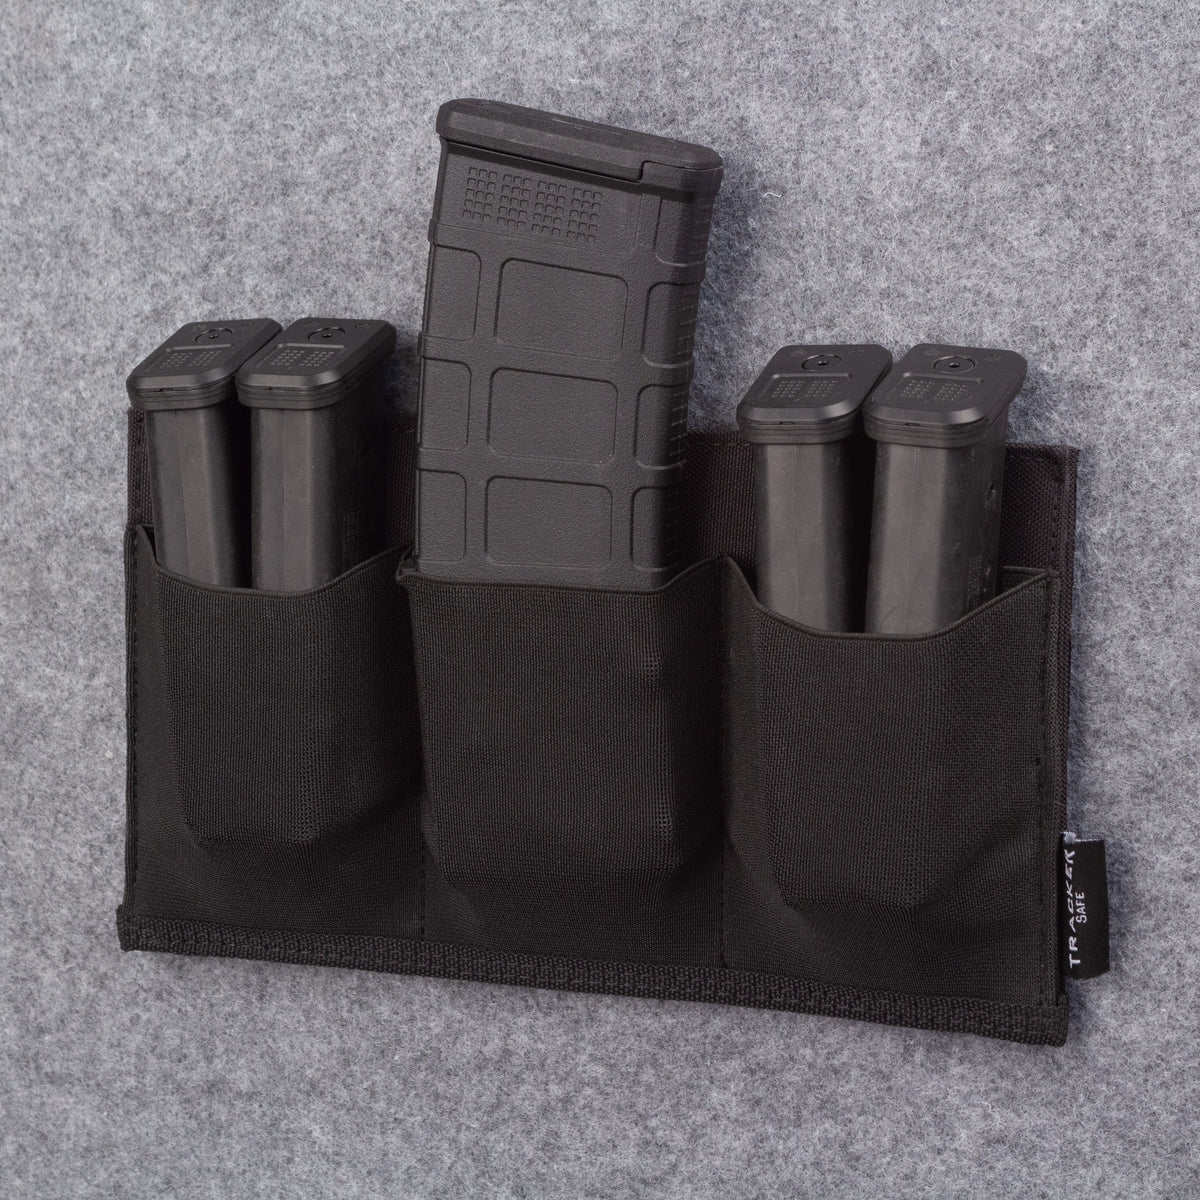 Tracker PE3 Pocket Elastic 3 Mag Holder with Mags 2